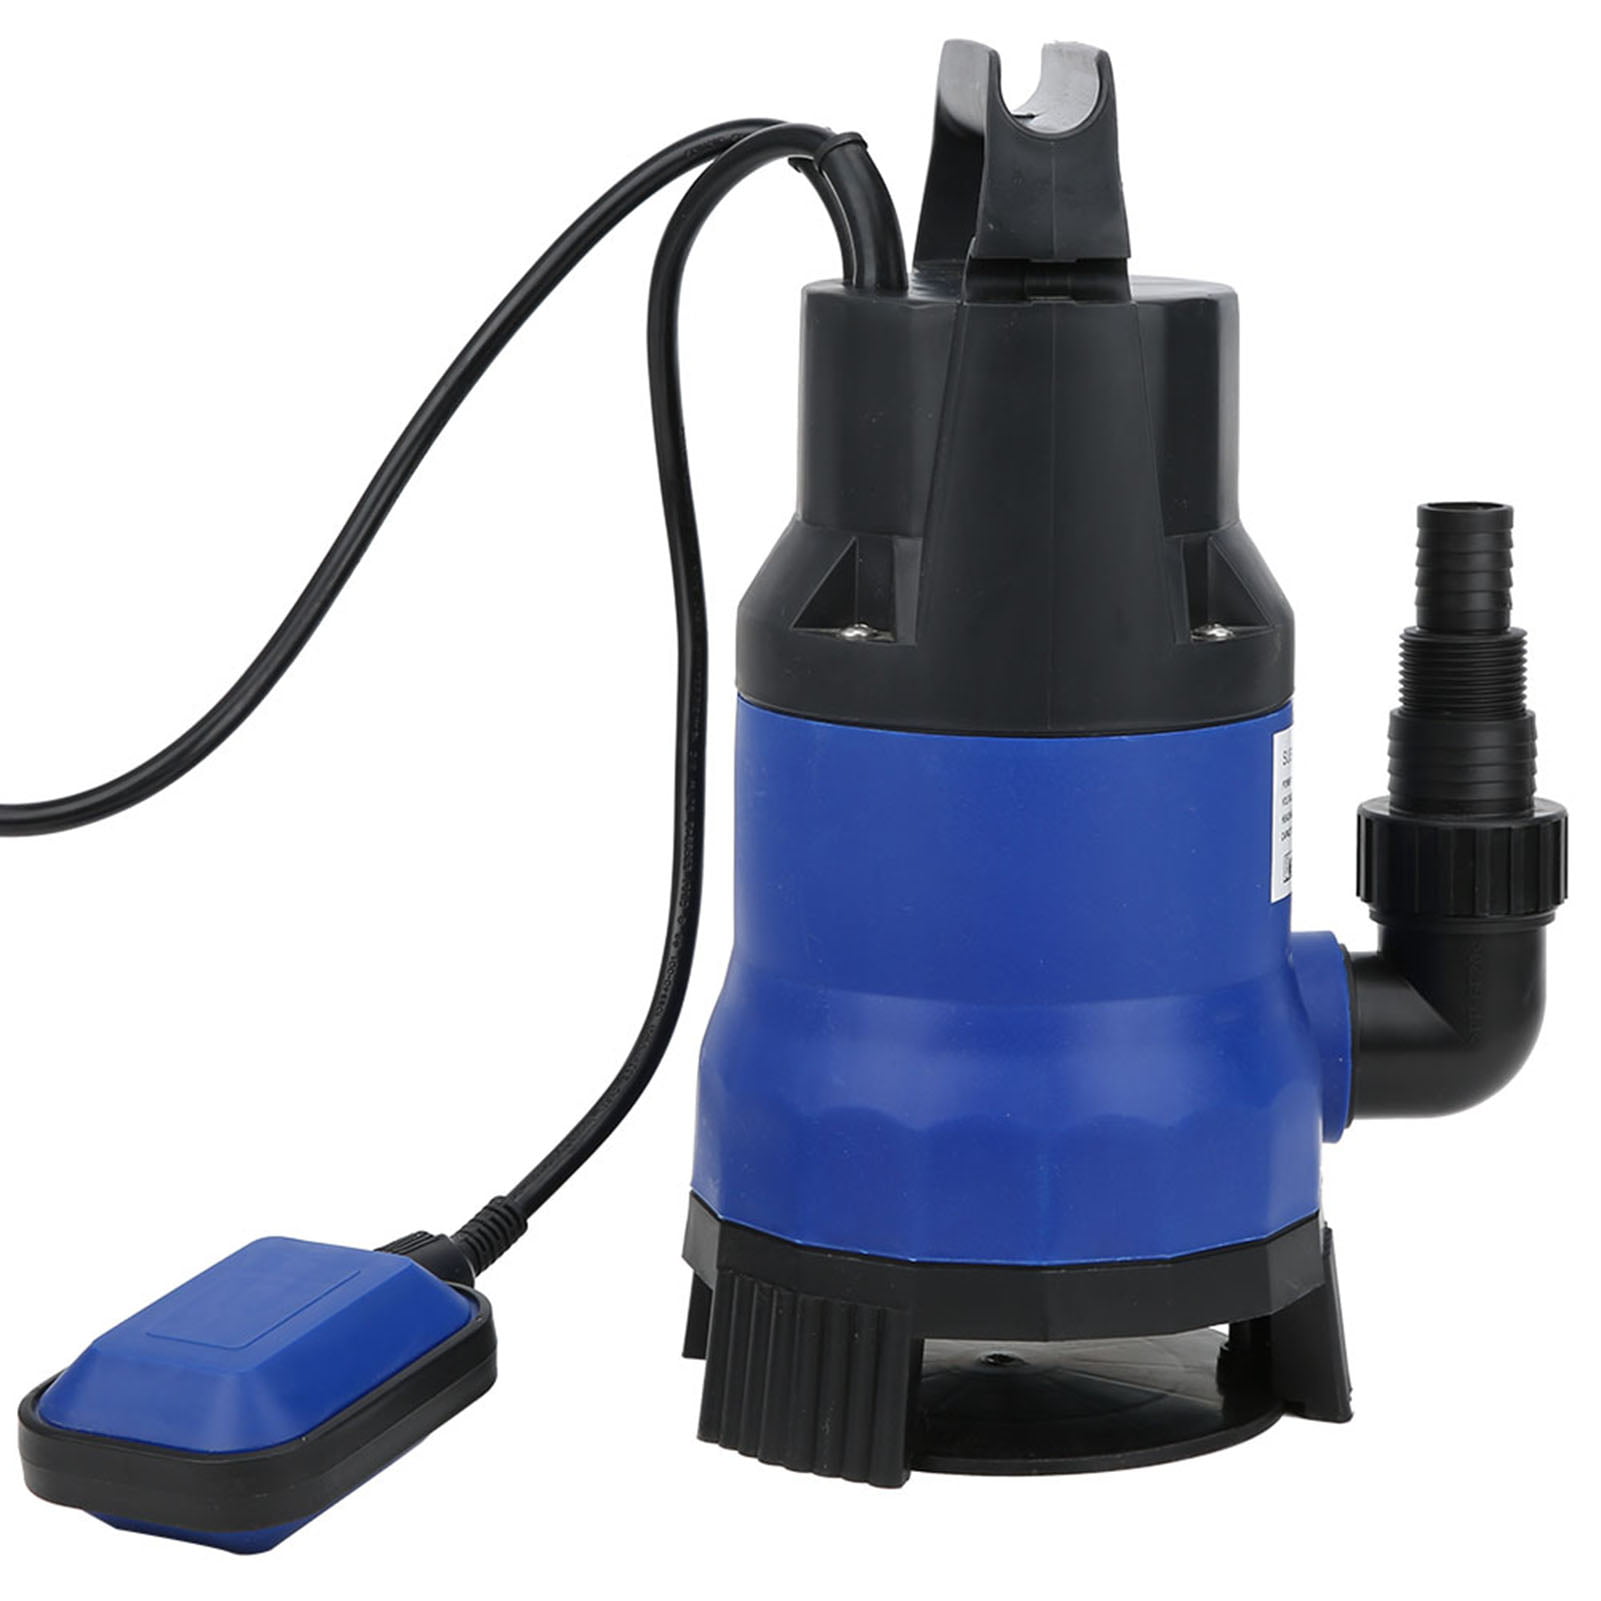 US Plug 110V 900W Water Pump Submersible Sewage Sump Aeration Dirty with Built-in Float Switch for Swim Pool Electric Power Tools Blue 